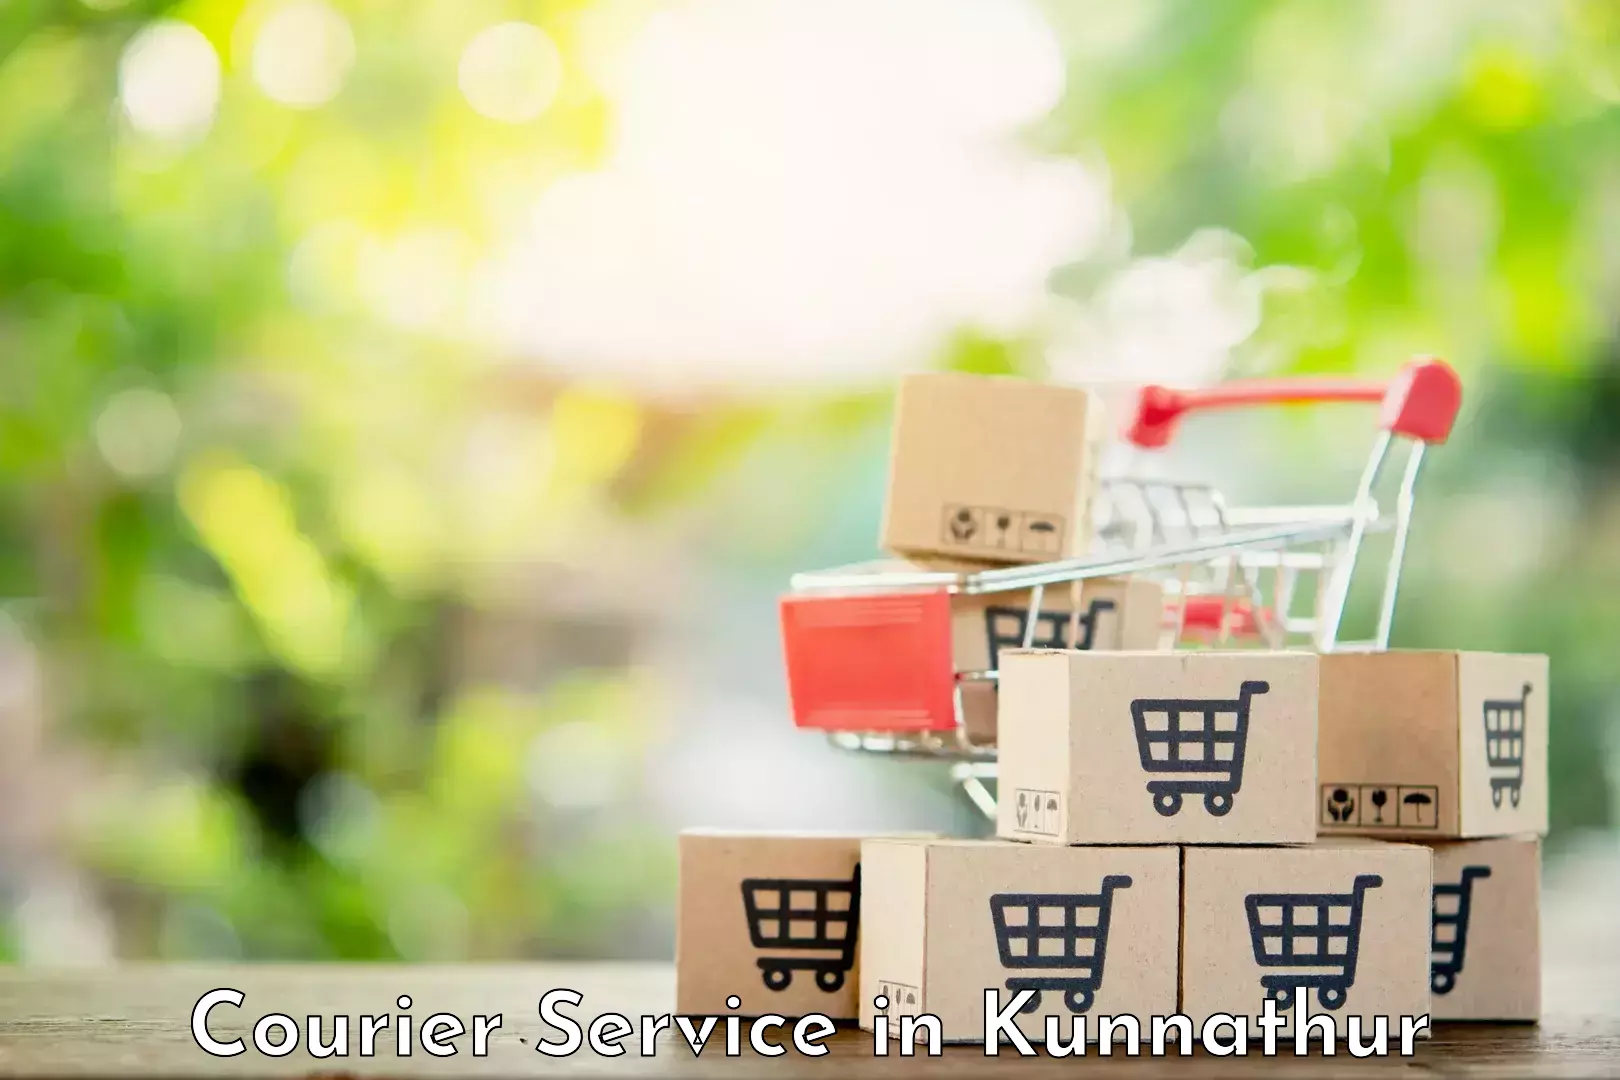 Logistics and distribution in Kunnathur